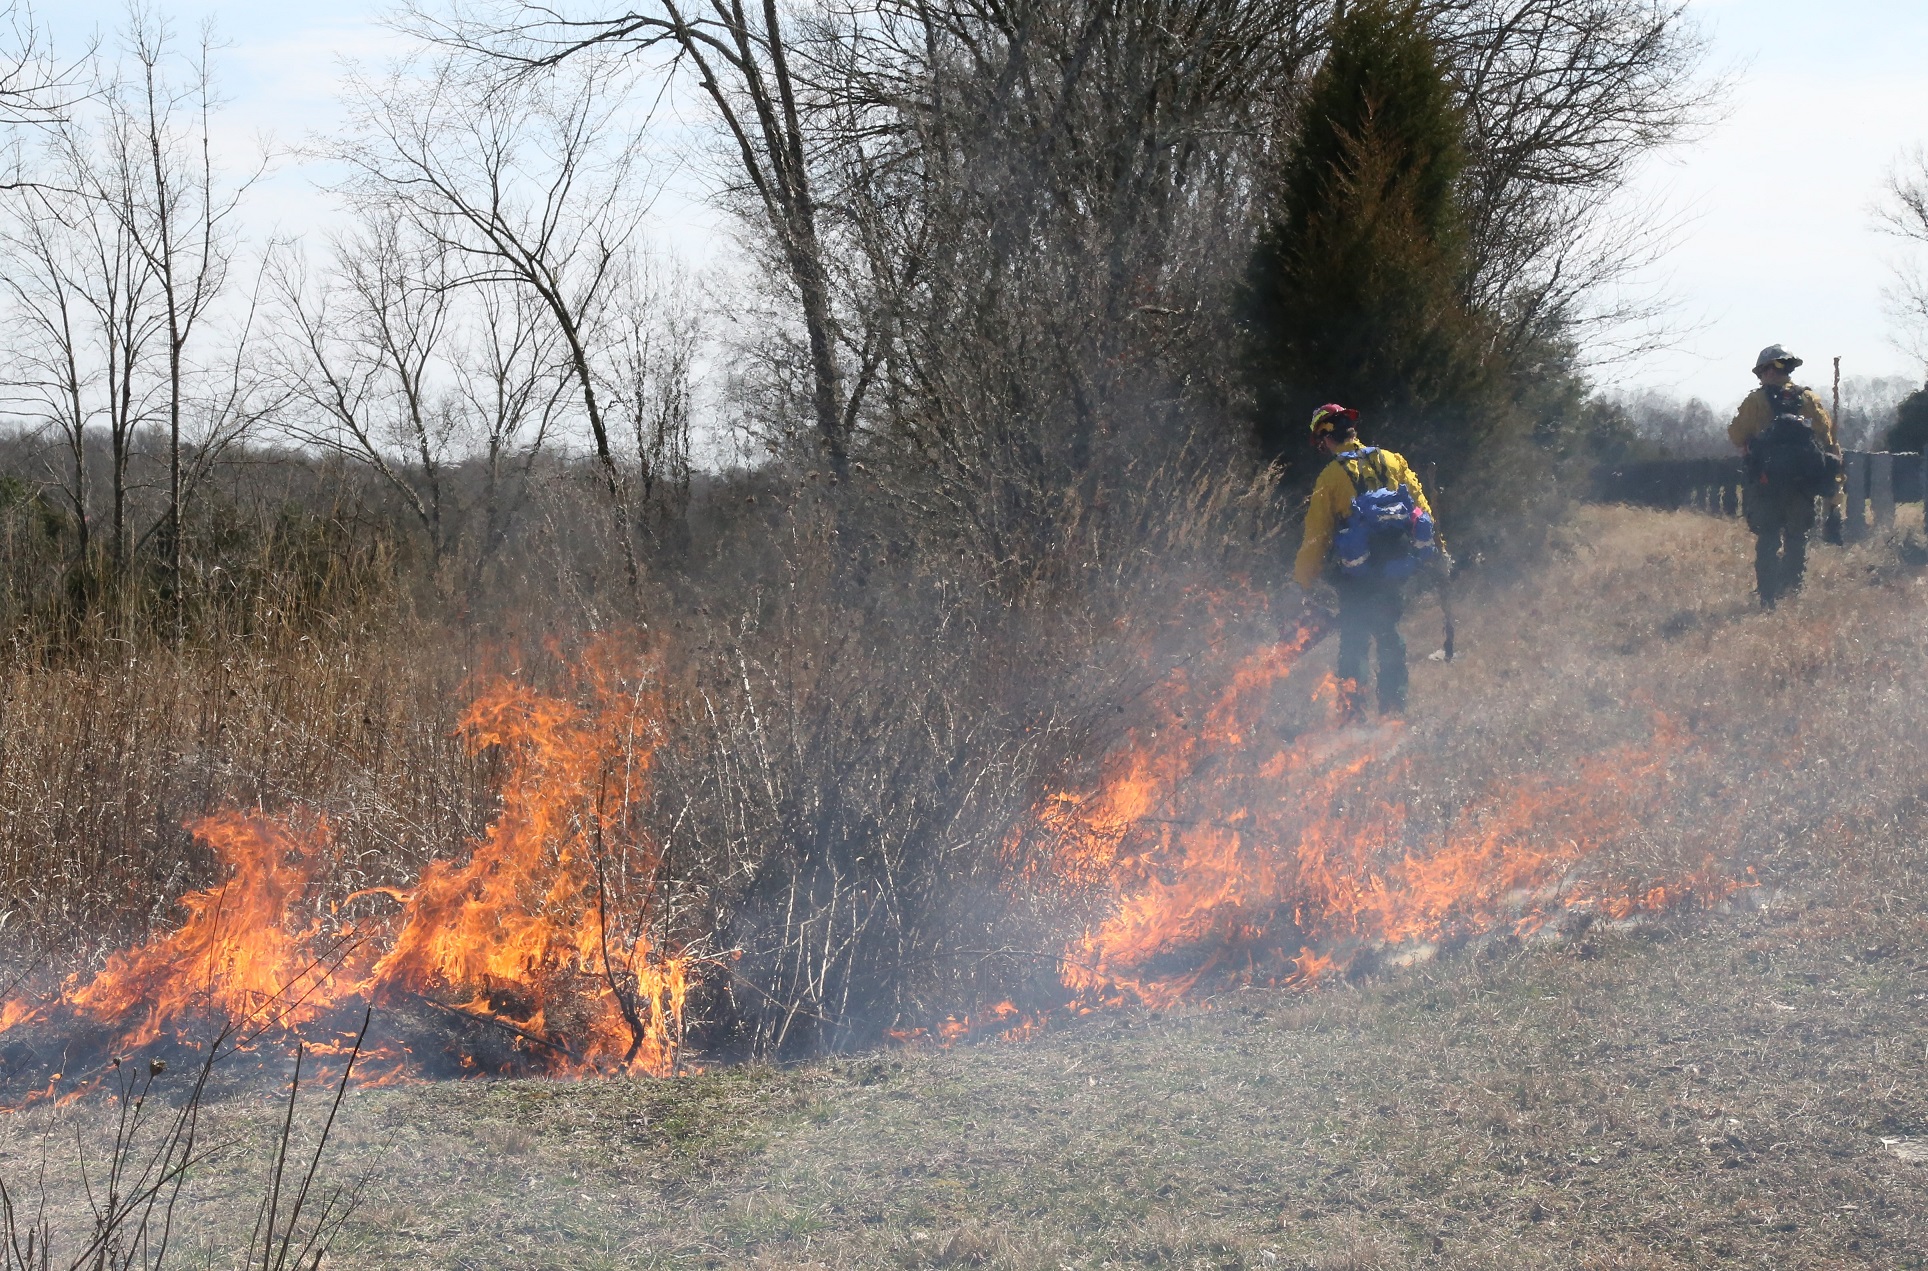 A person in a yellow shirt fire protective gear walks on the edge of a tall grass field dripping orange fire from a torch to the ground while orange flames burn behind him.